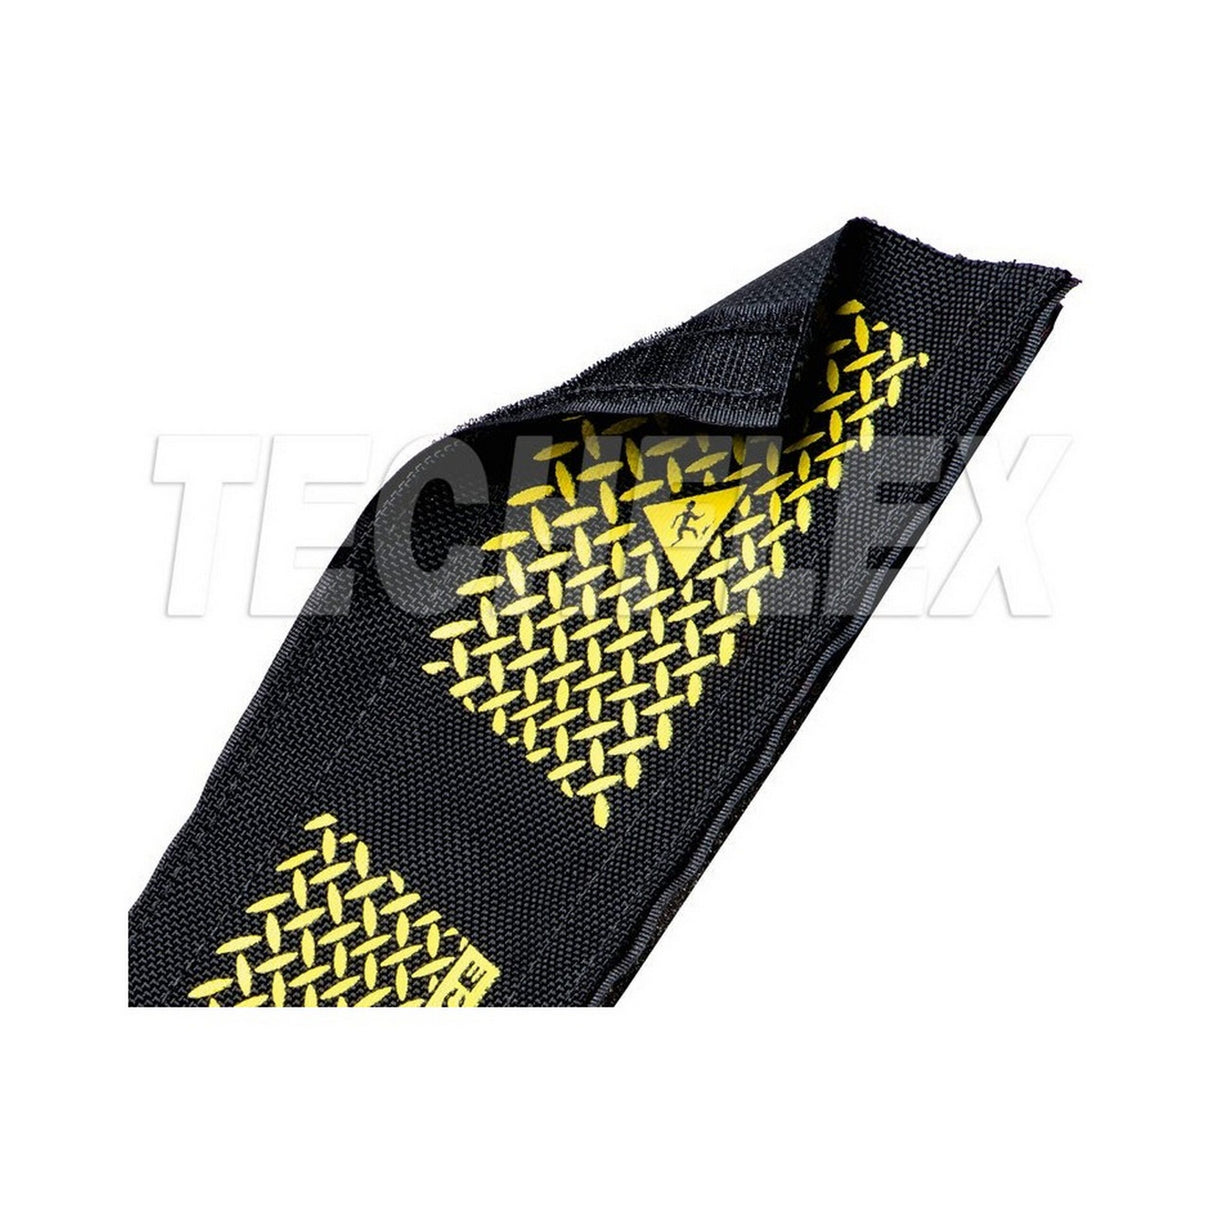 Techflex DRN5 Dura Race 5-Inch Wide Carpet Wire and Cable Protector Black/Yellow, 25 Foot